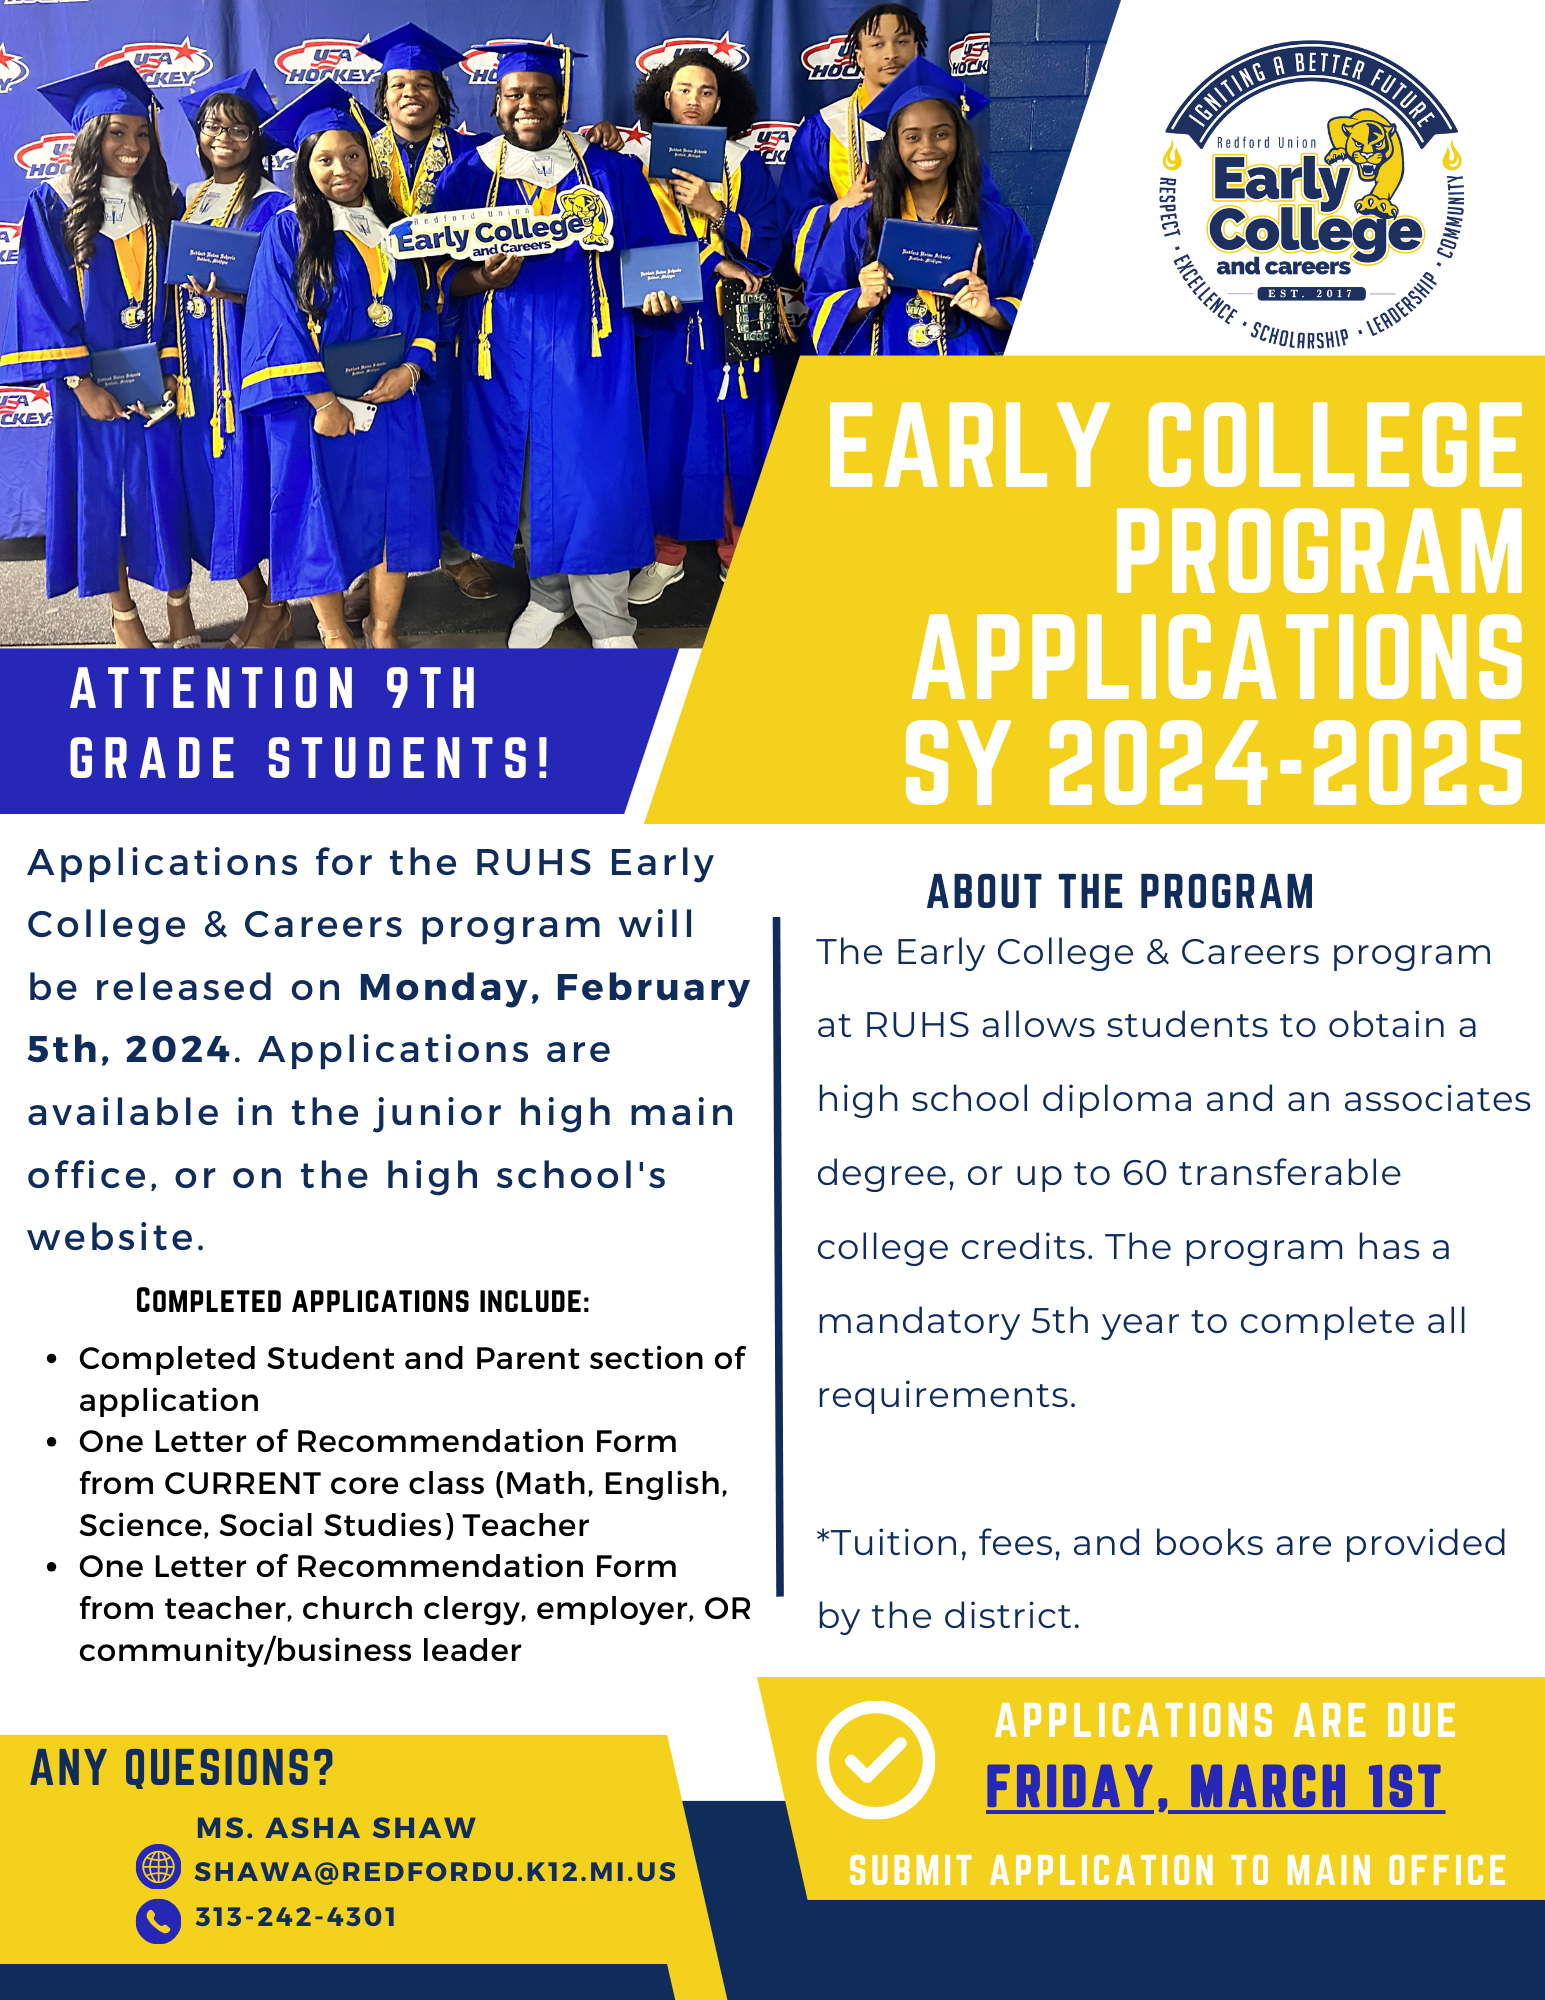 Early College Program Application SY 2024-2025